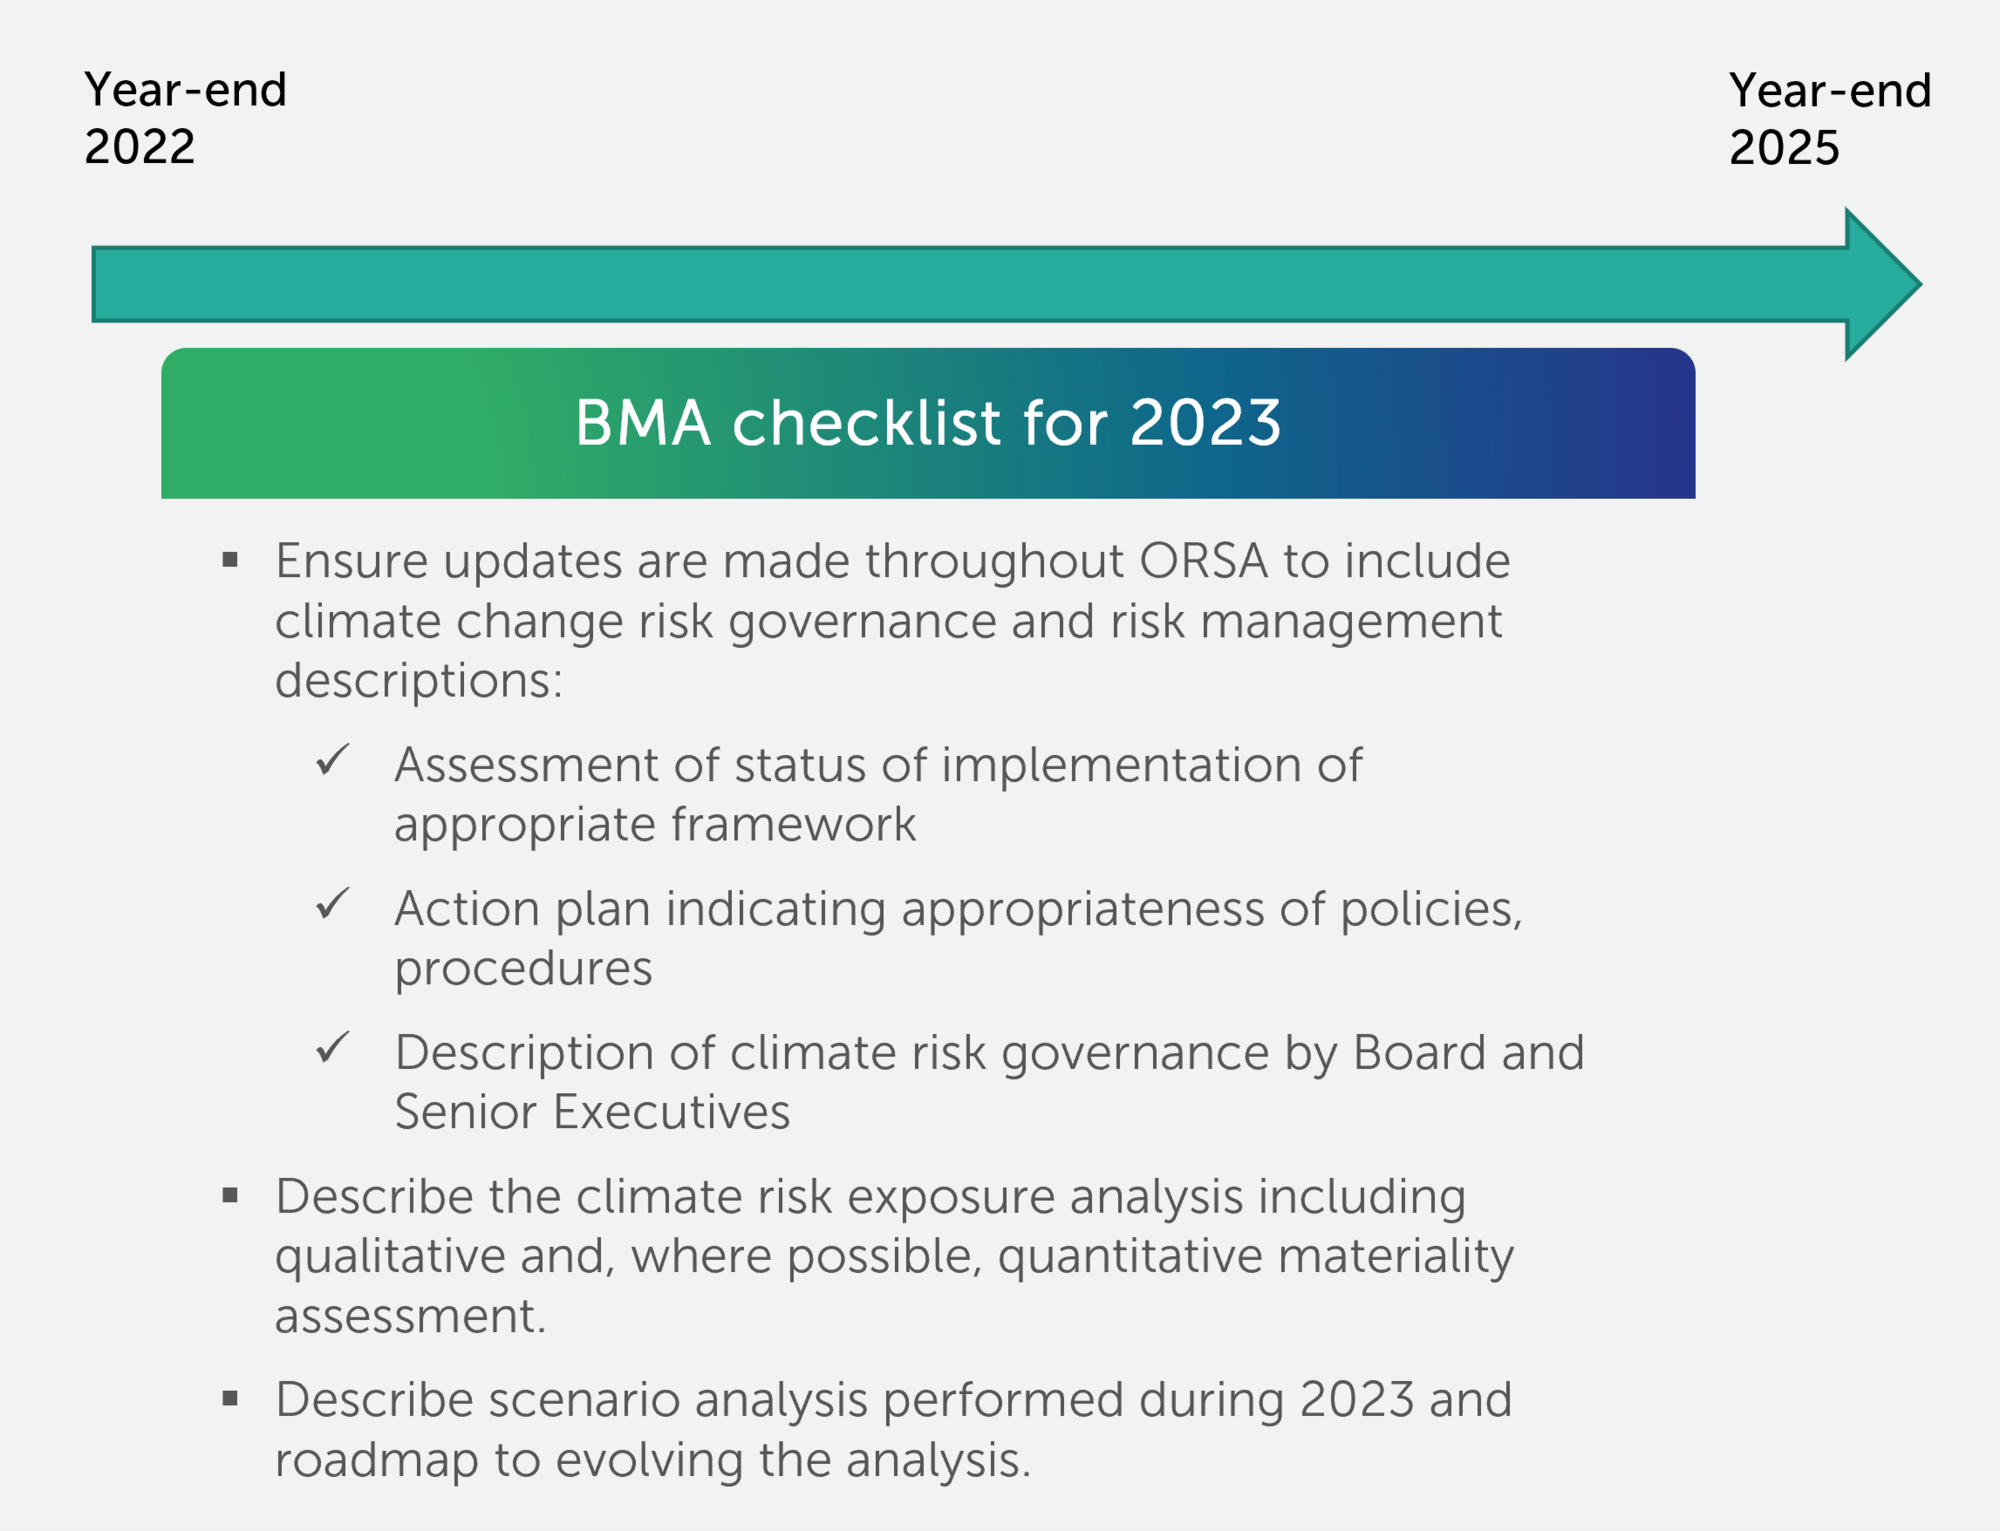 The BMA guidance presents a broad view of the expectations including Board responsibilities and governance, strategy, risk monitoring and escalation regimes, staff training requirements, as well as the ORSA and scenario analysis expectations.